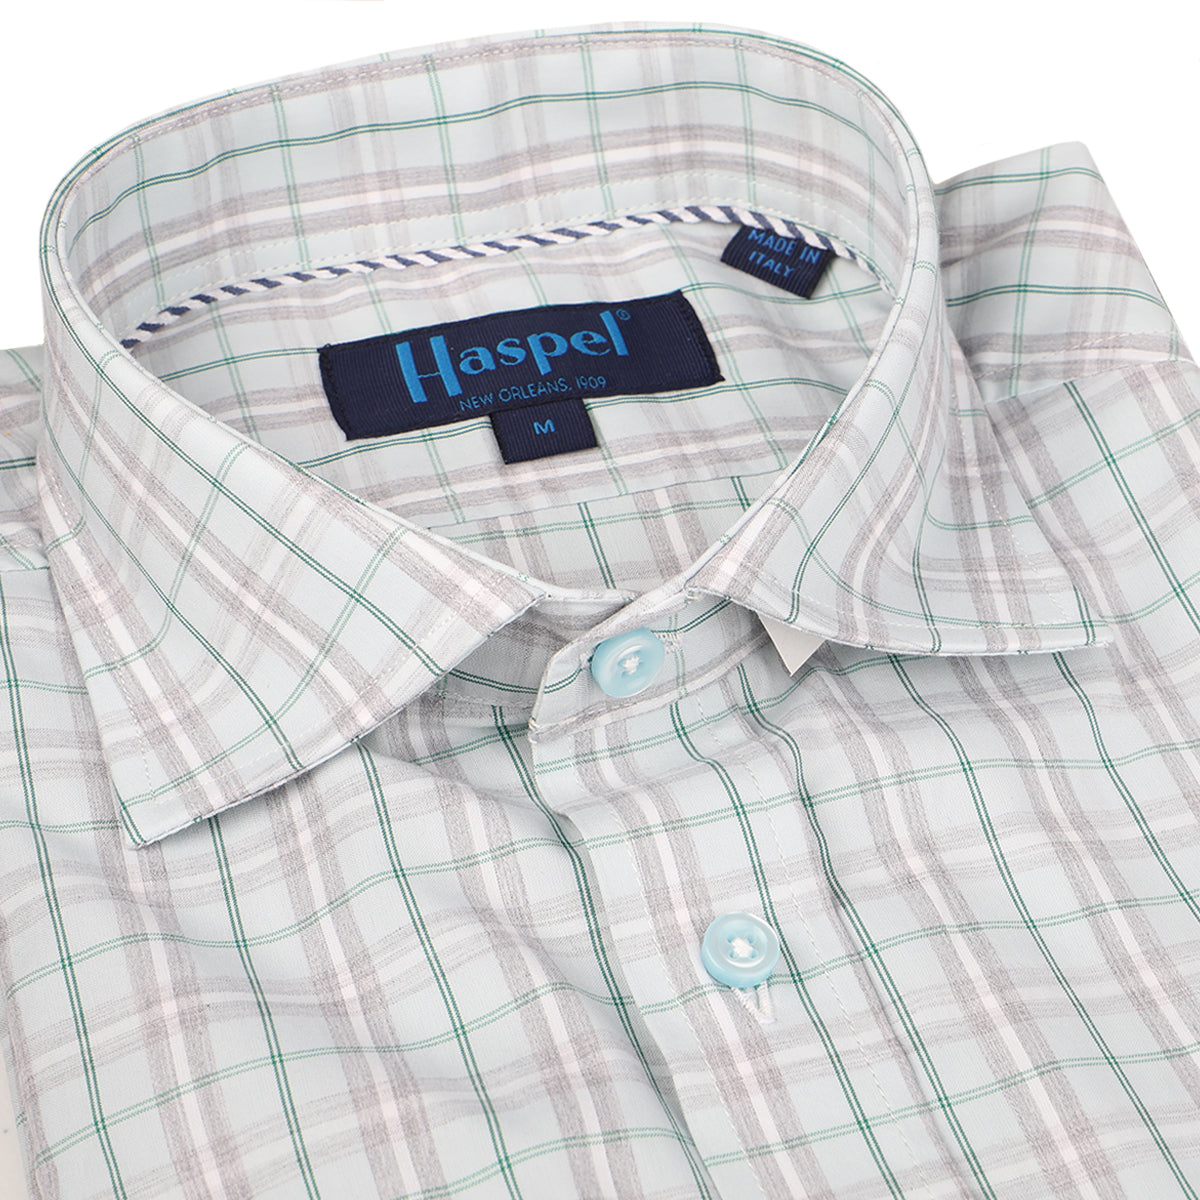 Fresh &amp; minty, plaid and ready. Casual and classic.   100% Cotton  •  Long Sleeve  •  Spread Collar  •  Chest Pocket  •  Button Cuff  •  Machine Washable  •  Made in Italy Return Policy